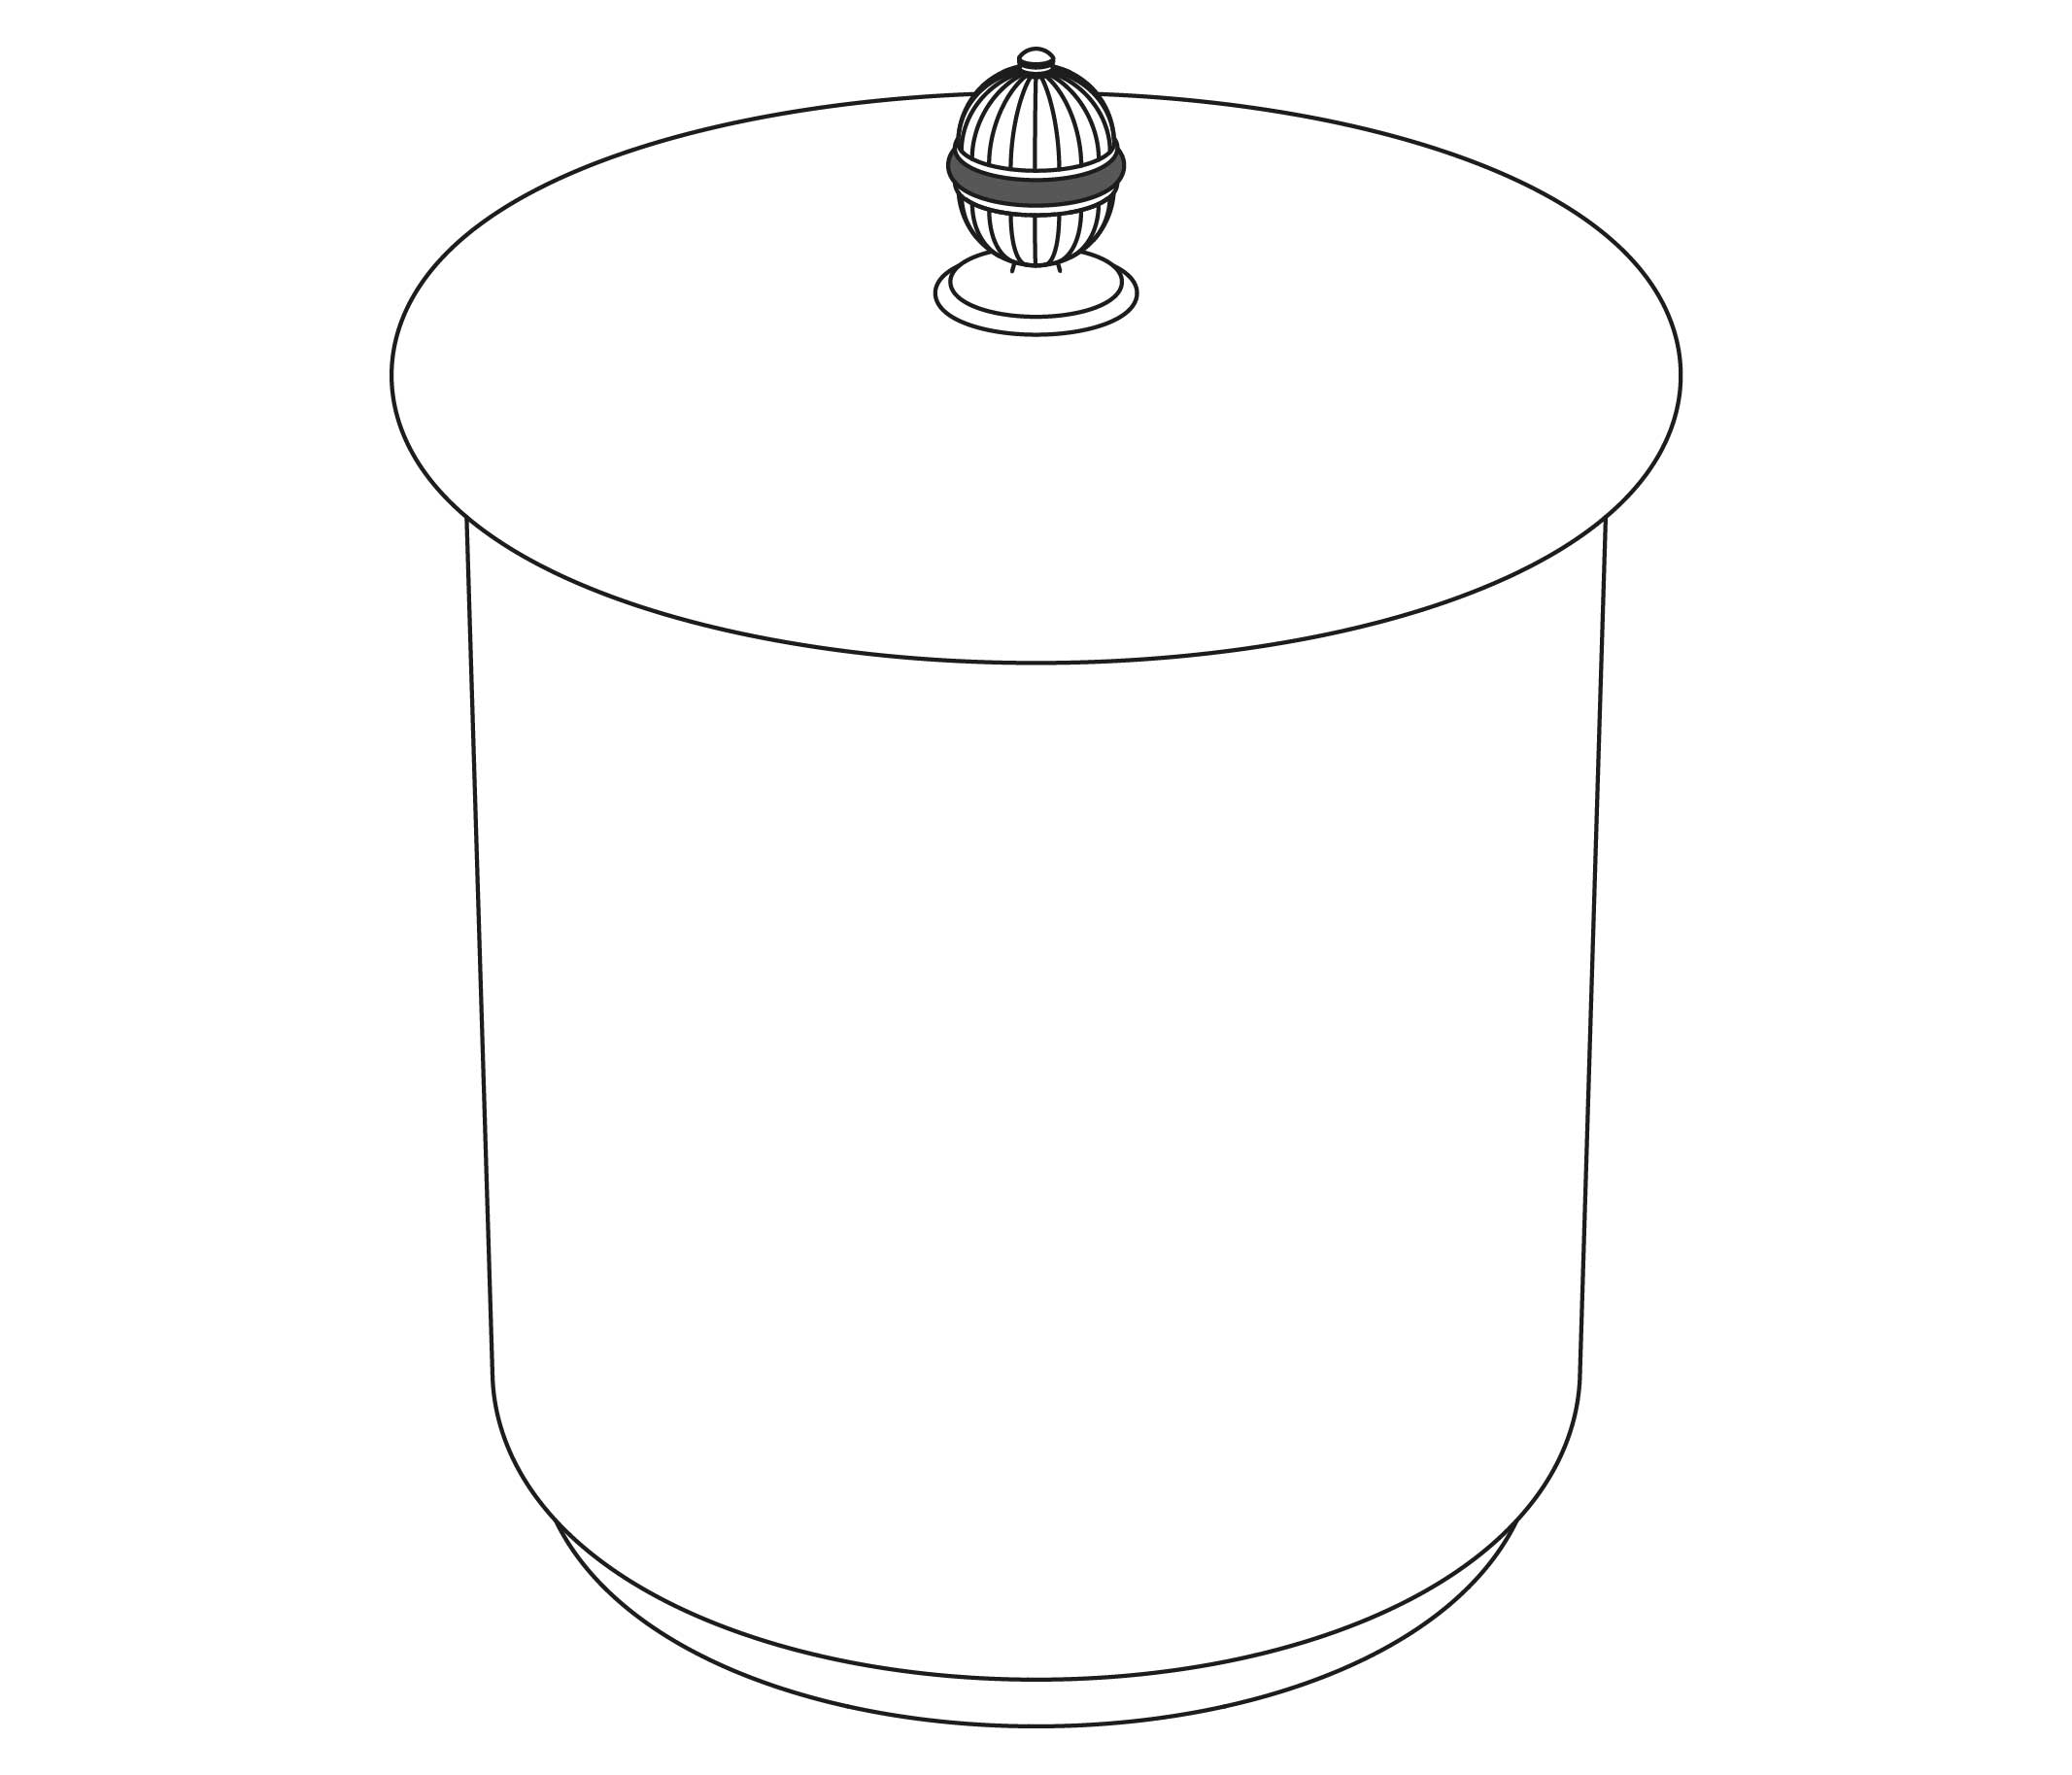 S134-577 Bin with cover